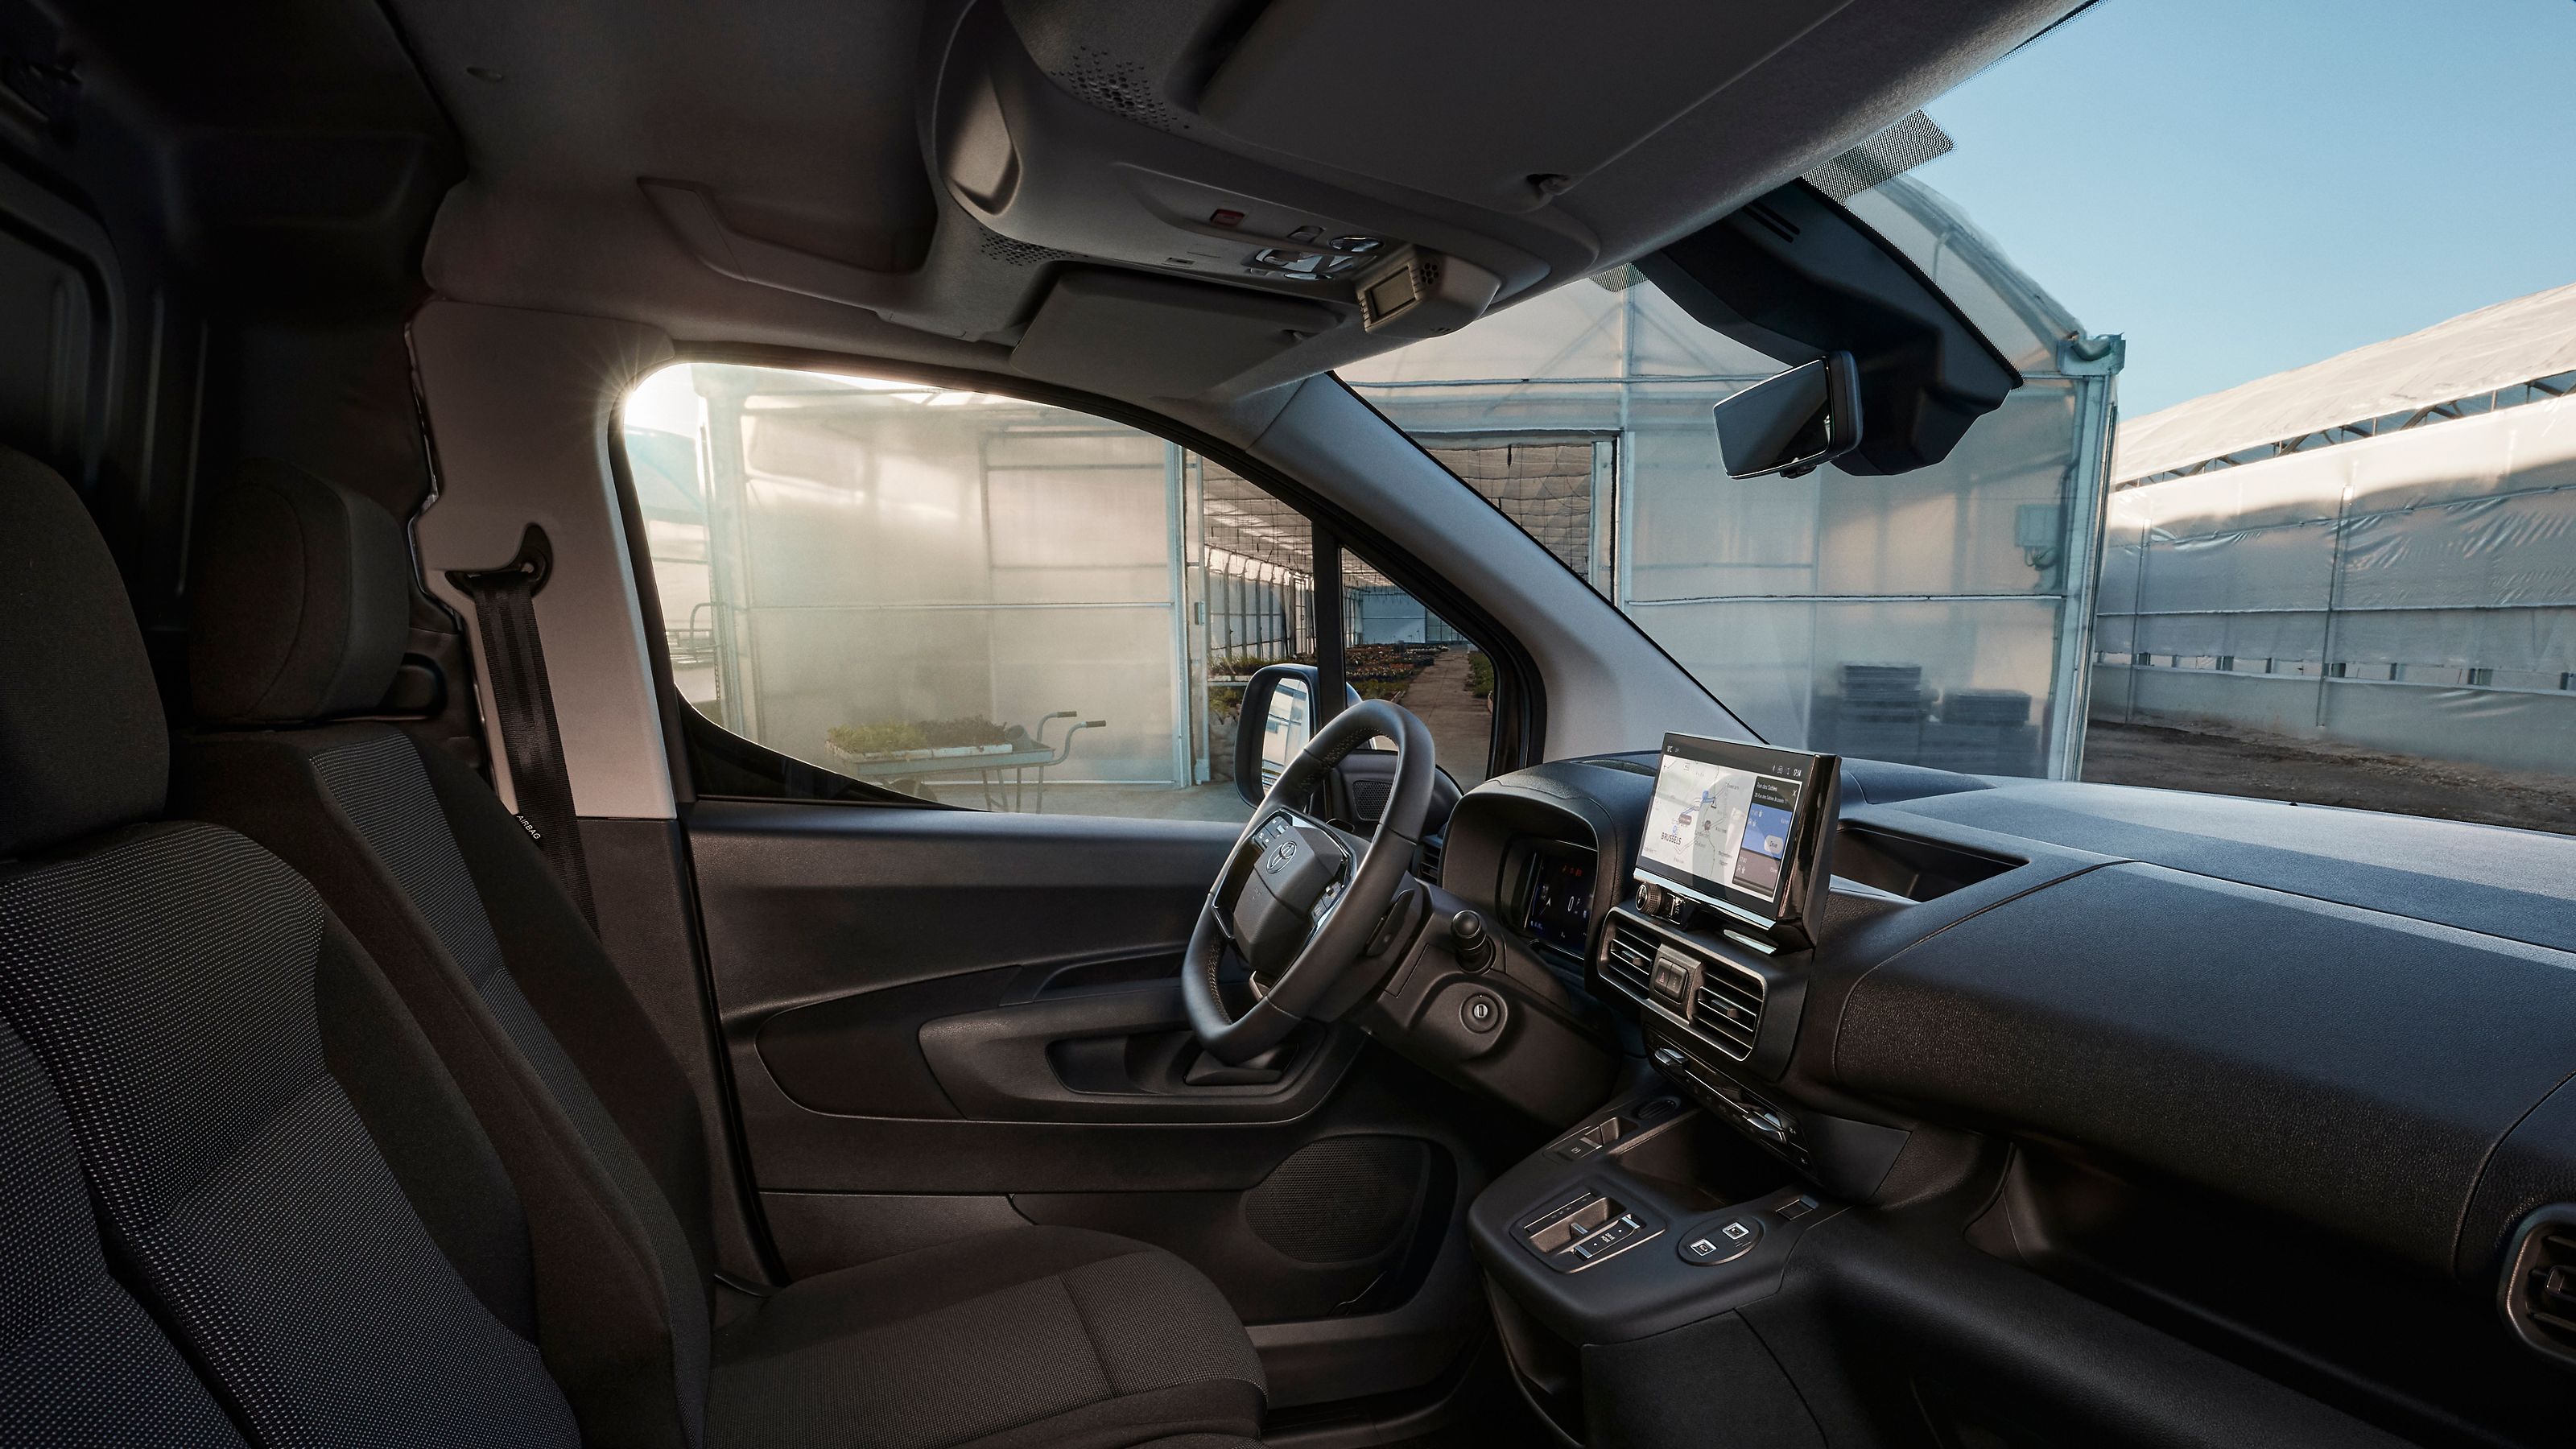 The Proace City’s premium , well-appointed interior 